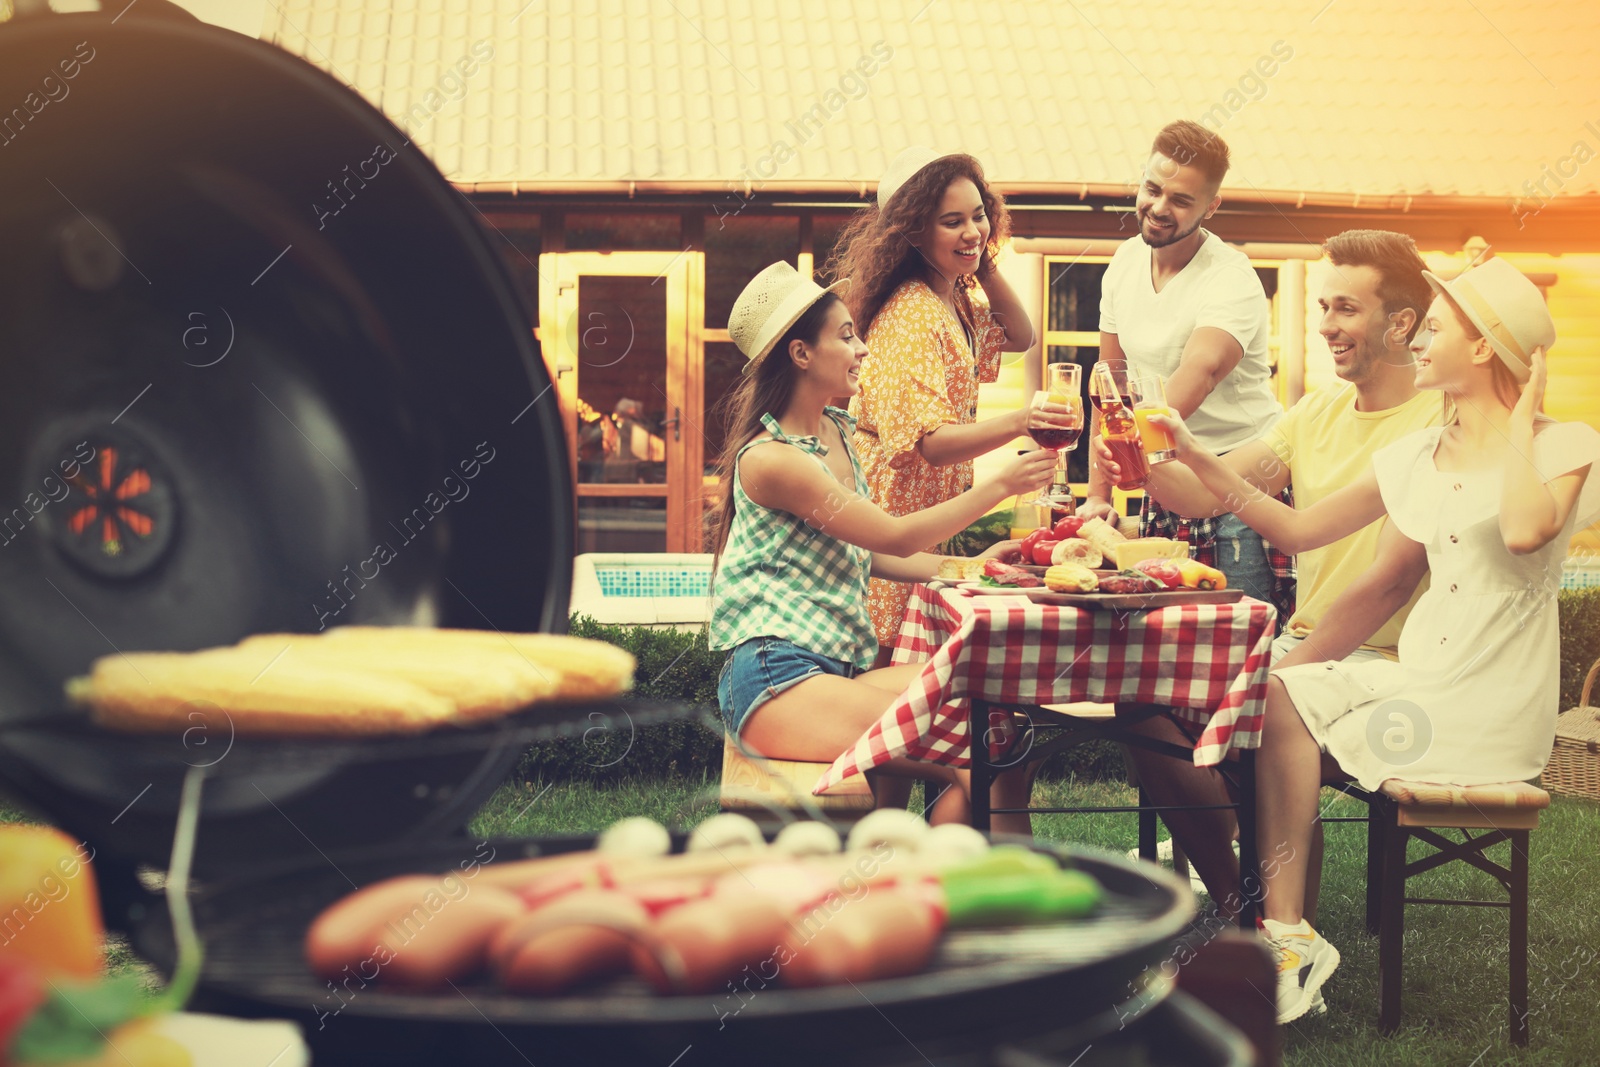 Image of Group of friends at barbecue party outdoors. Blurred view of grill with sausages and vegetables